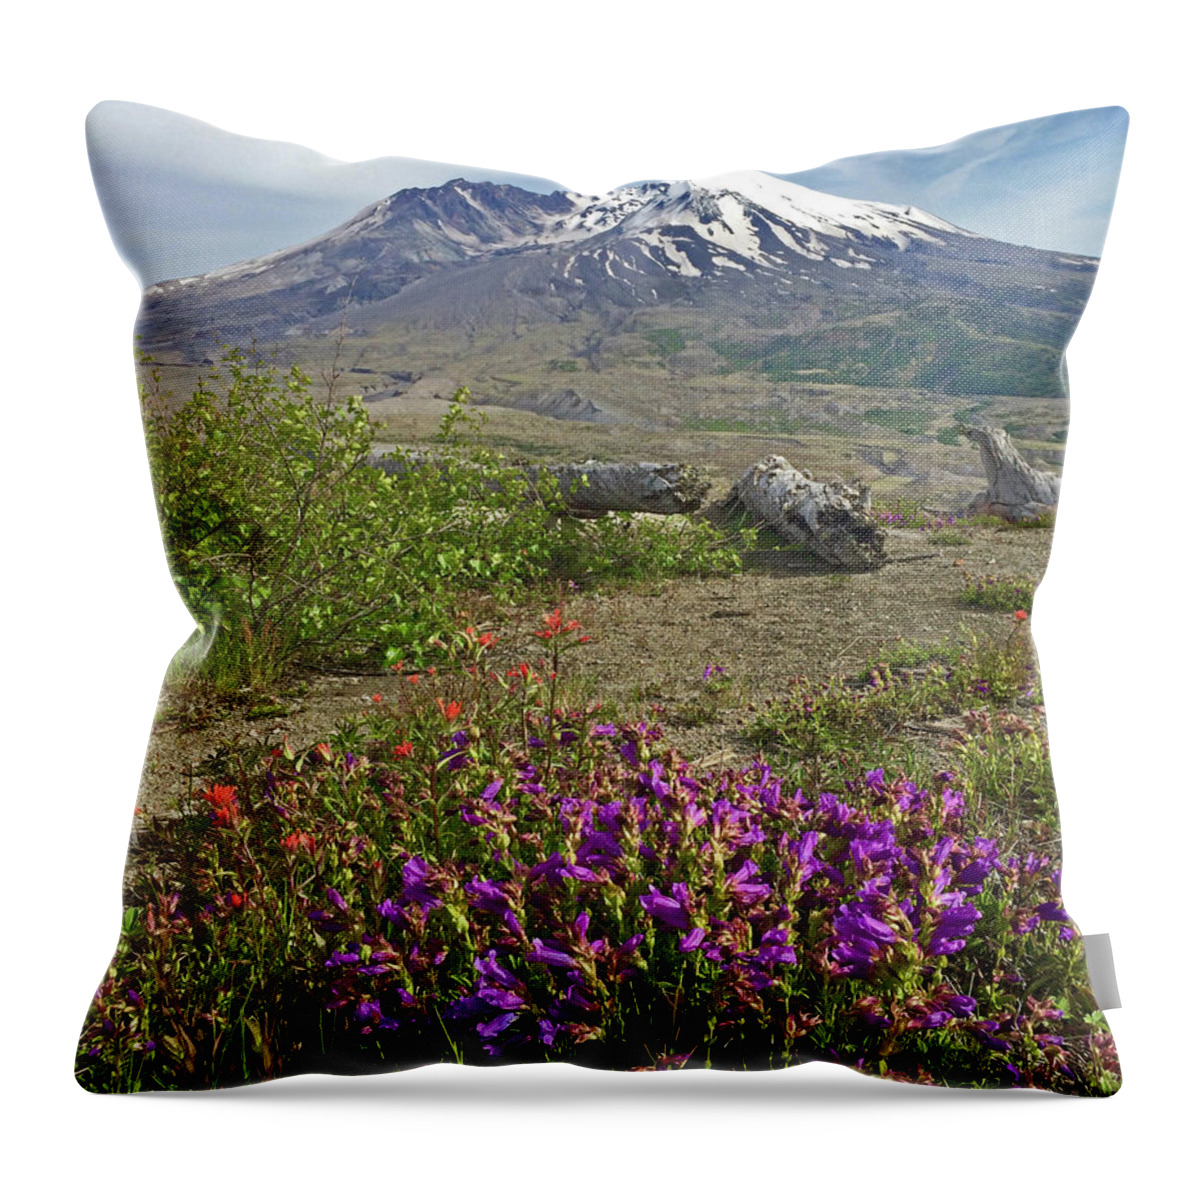 Volcano Throw Pillow featuring the photograph Mount St. Helens by Tiffany Whisler